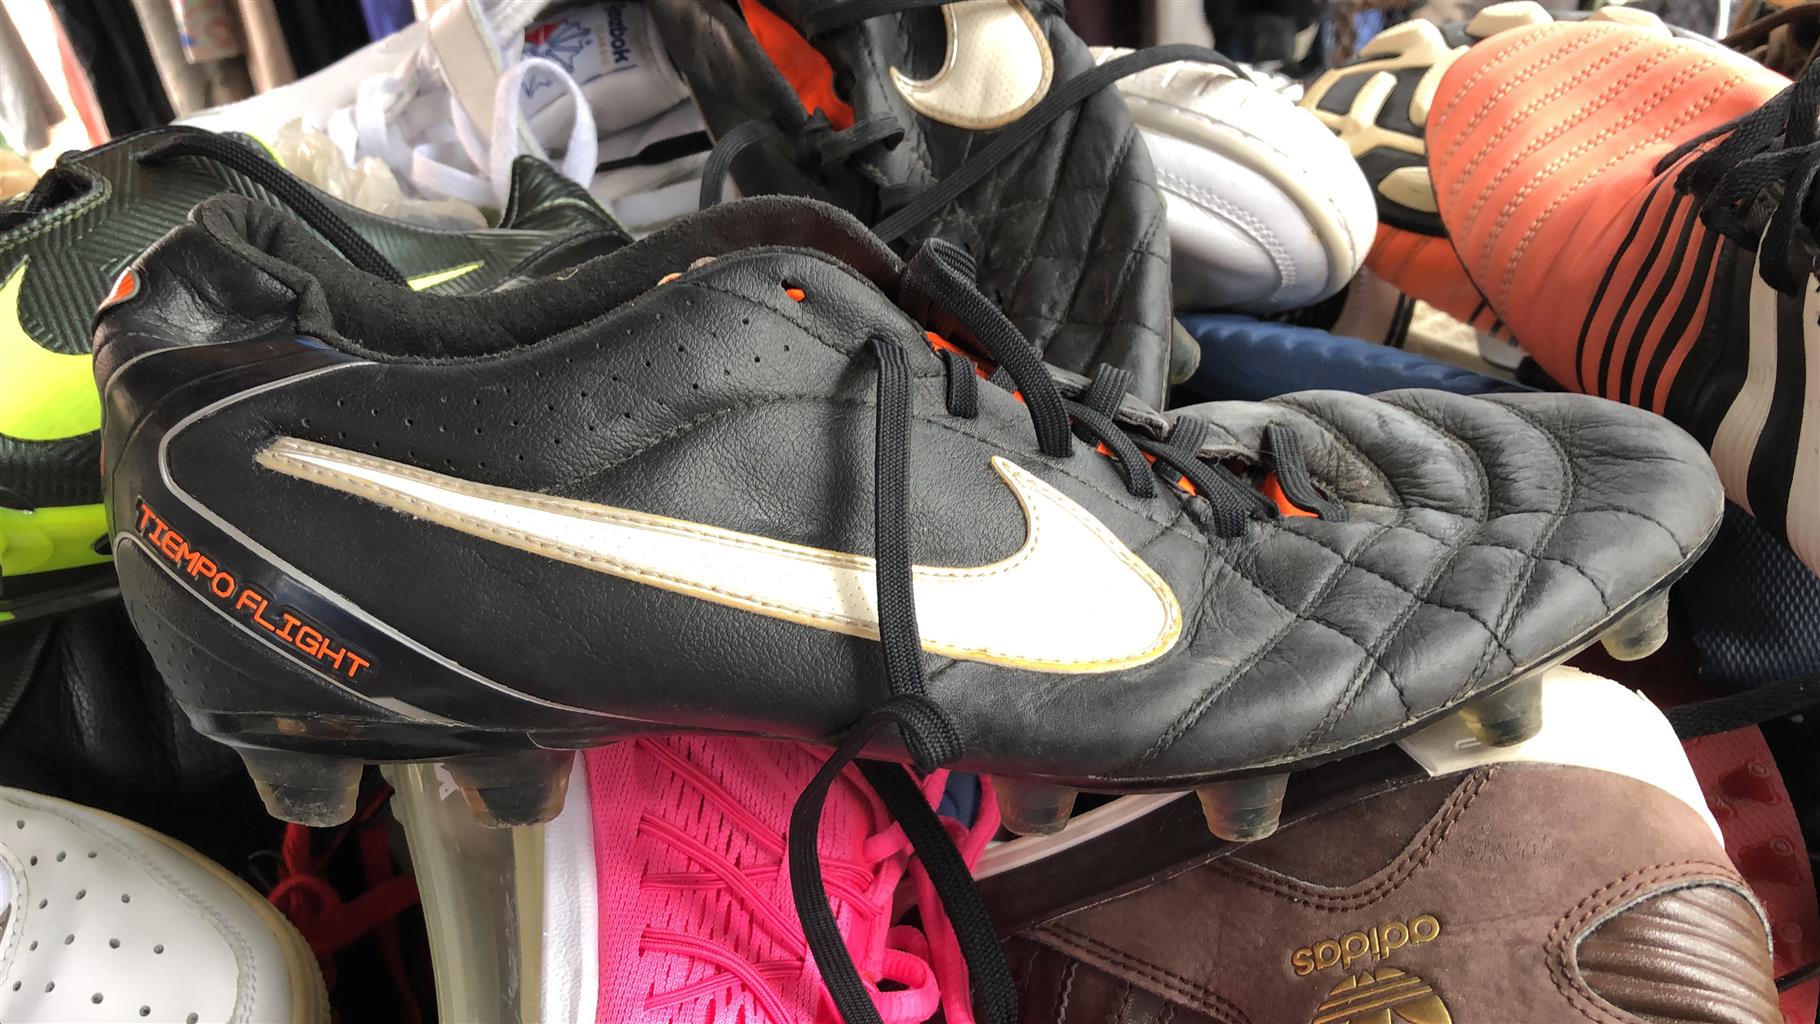 cheap soccer boots for sale in johannesburg